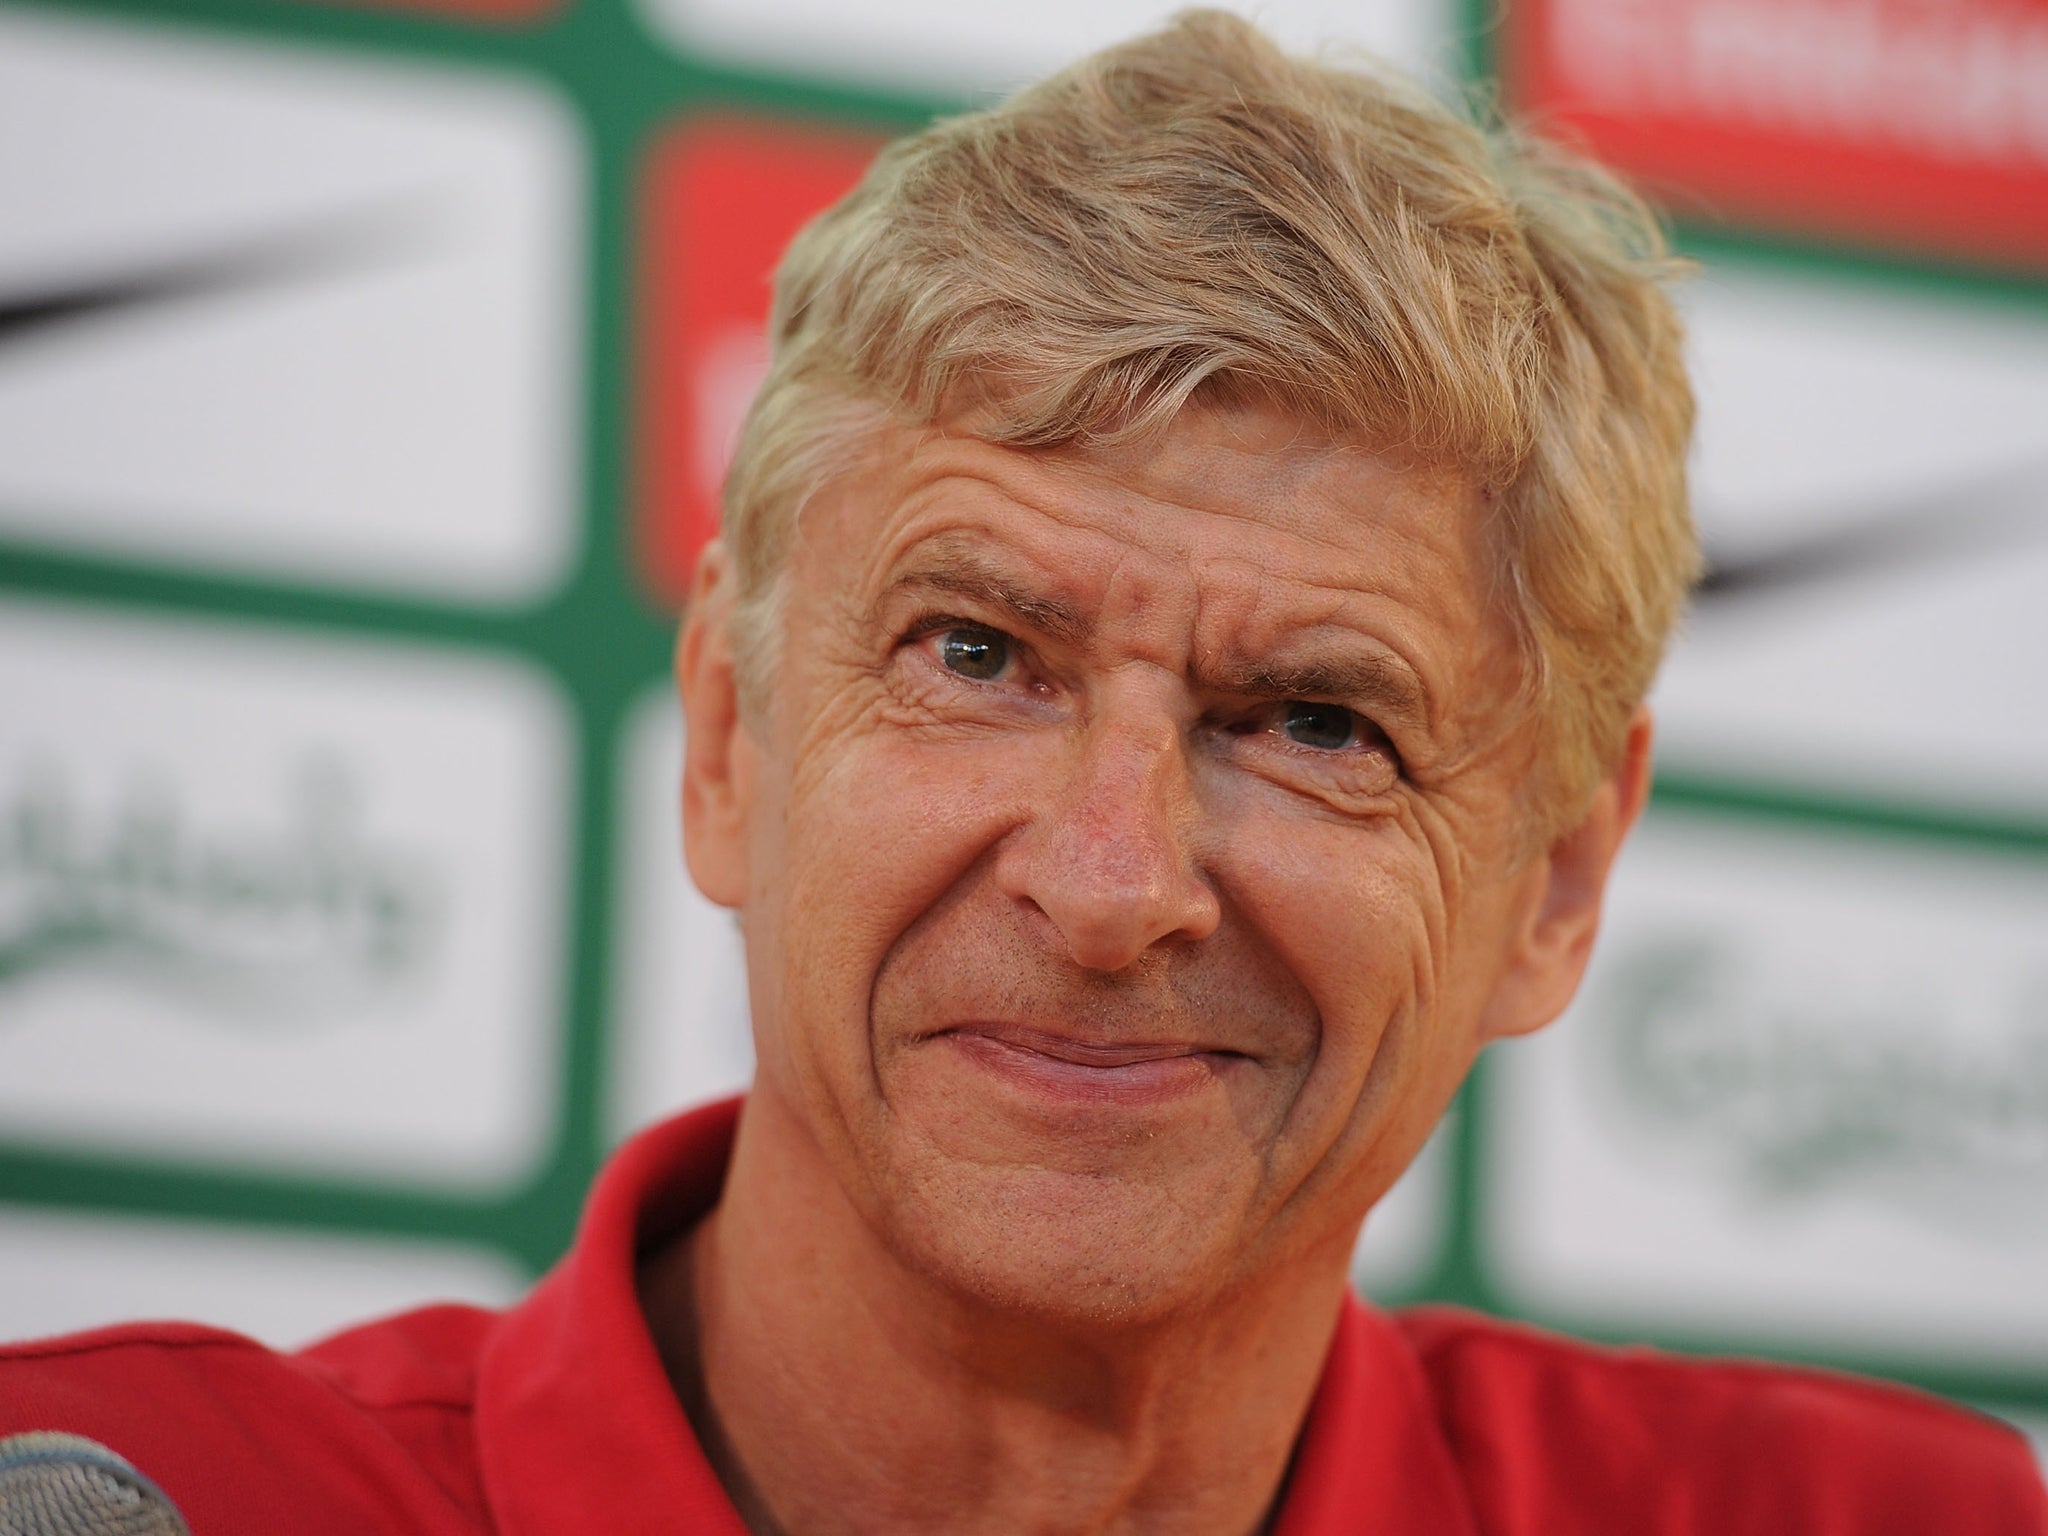 Wenger was speaking ahead of his side's match against Manchester City in Helsinki